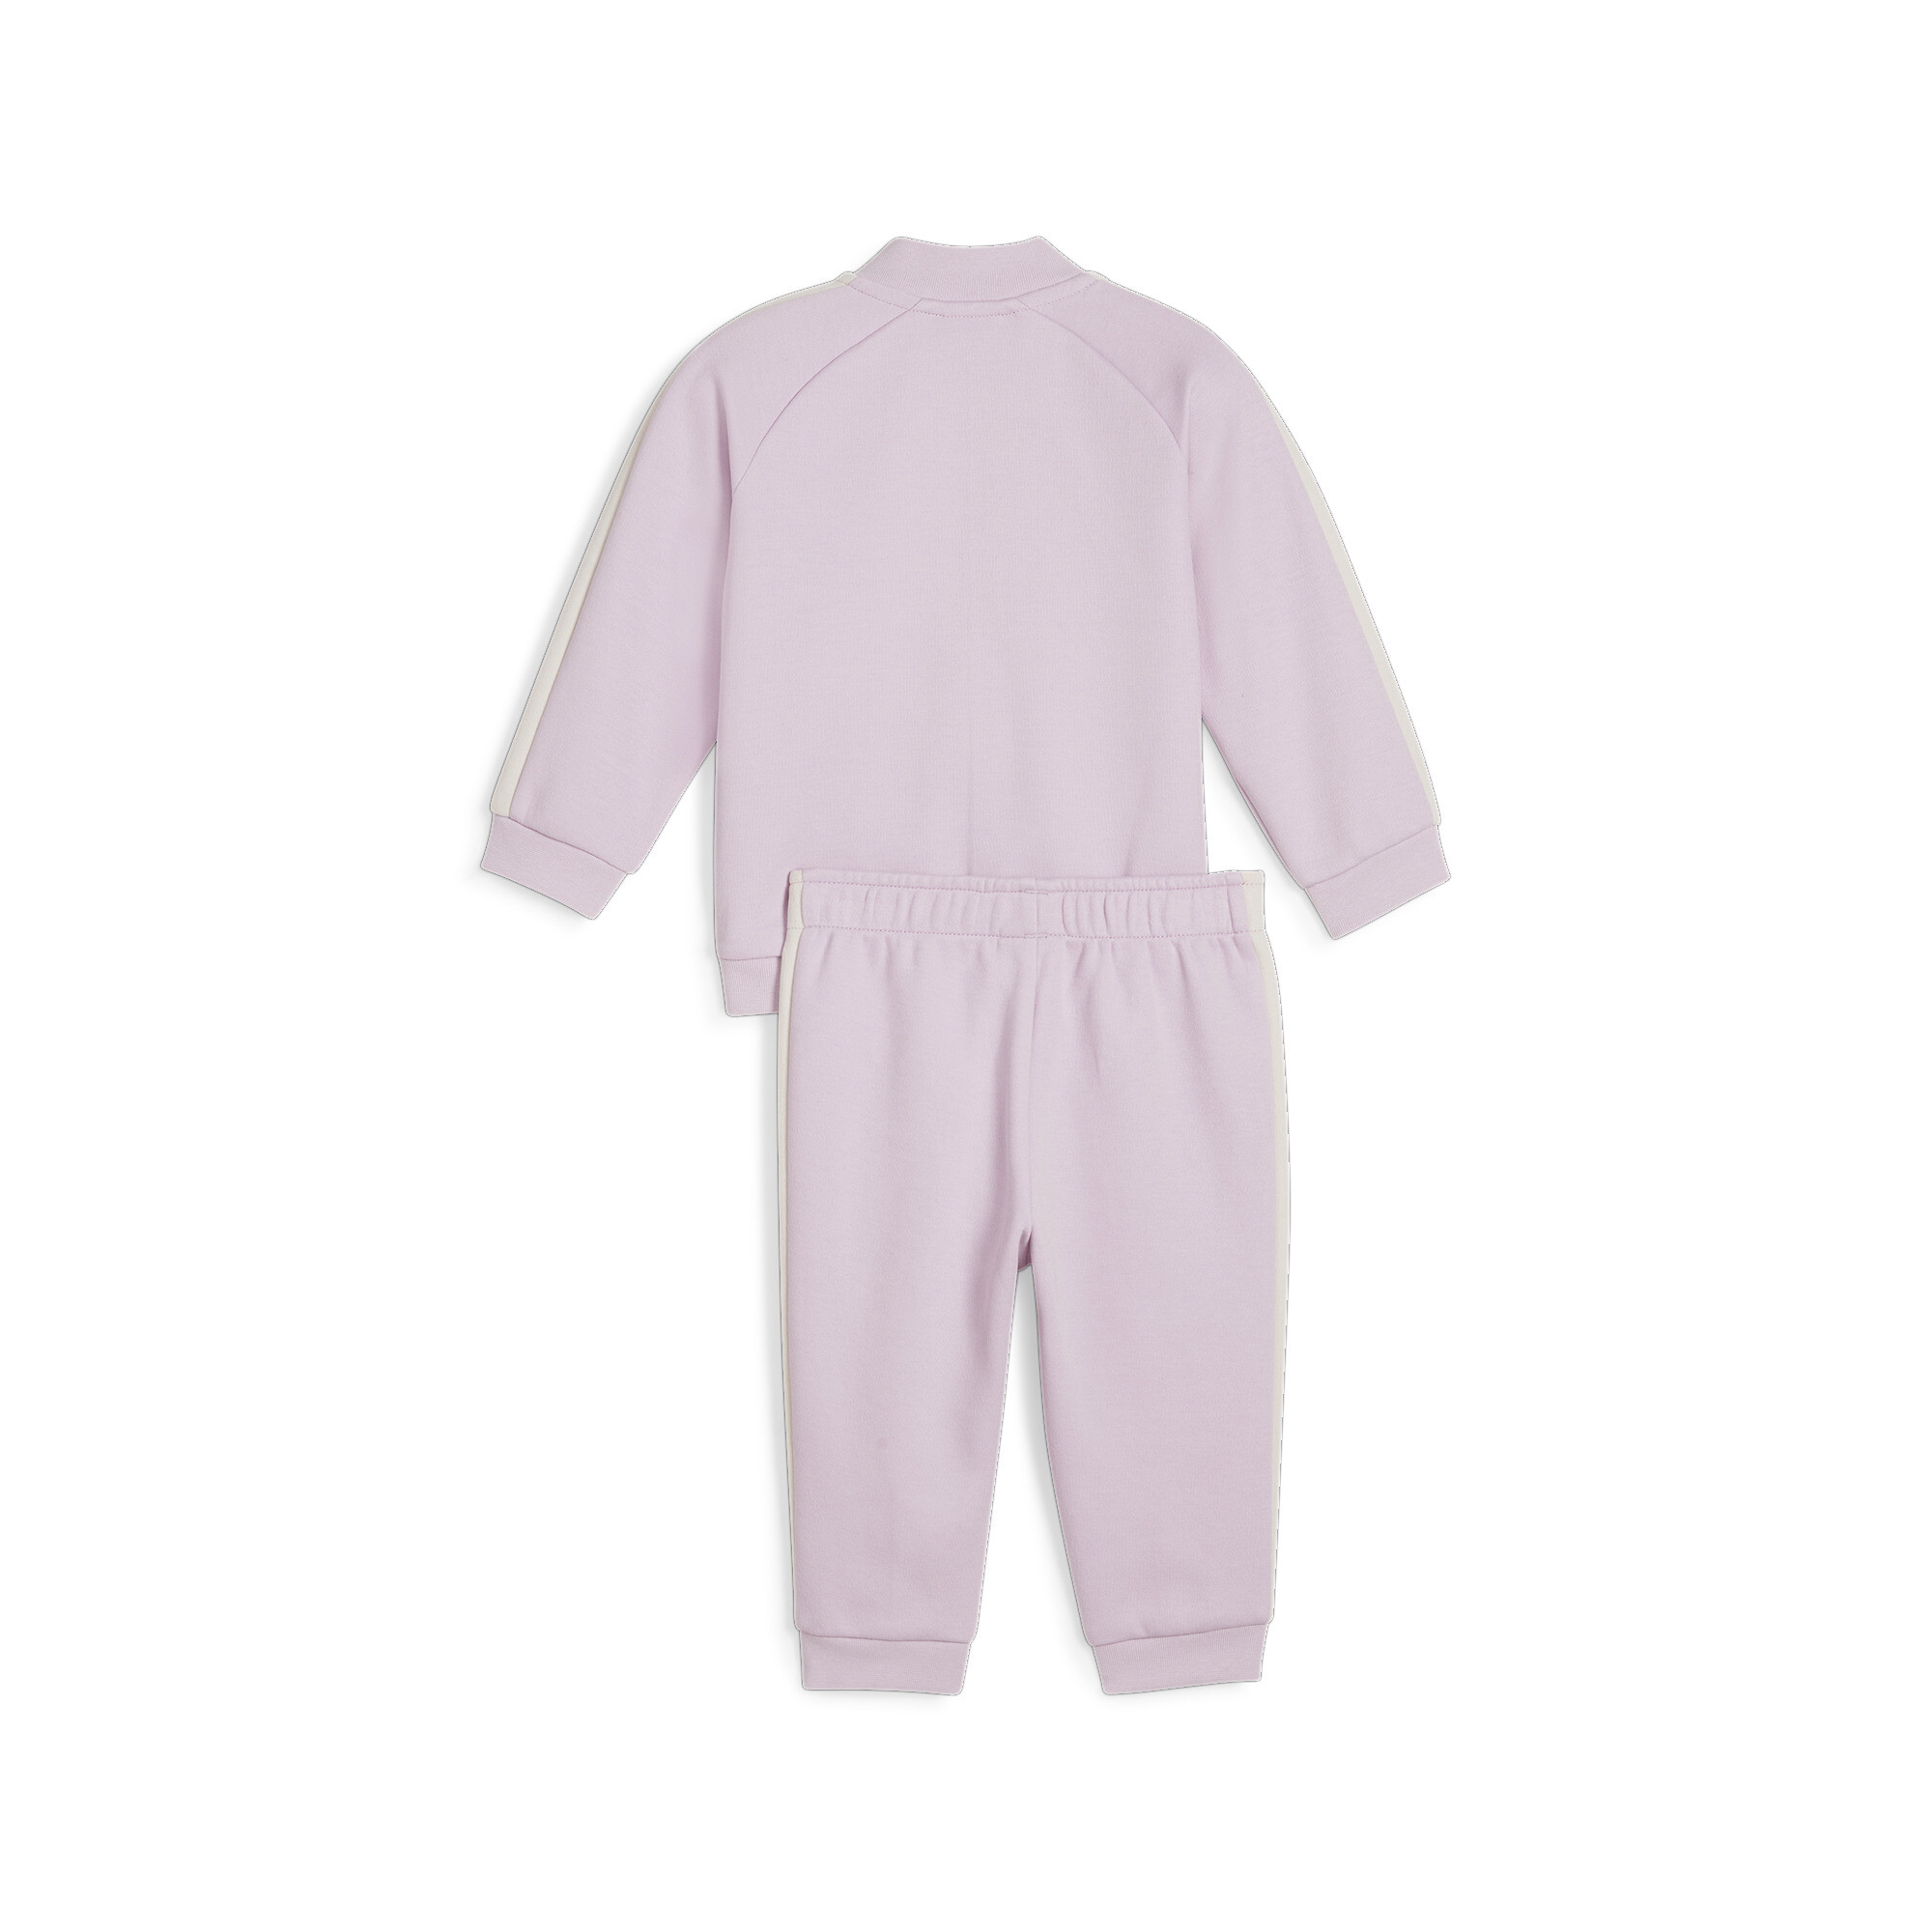 PUMA MINICATS T7 ICONIC Baby Tracksuit Set In 90 - Purple, Size 3-4 Youth